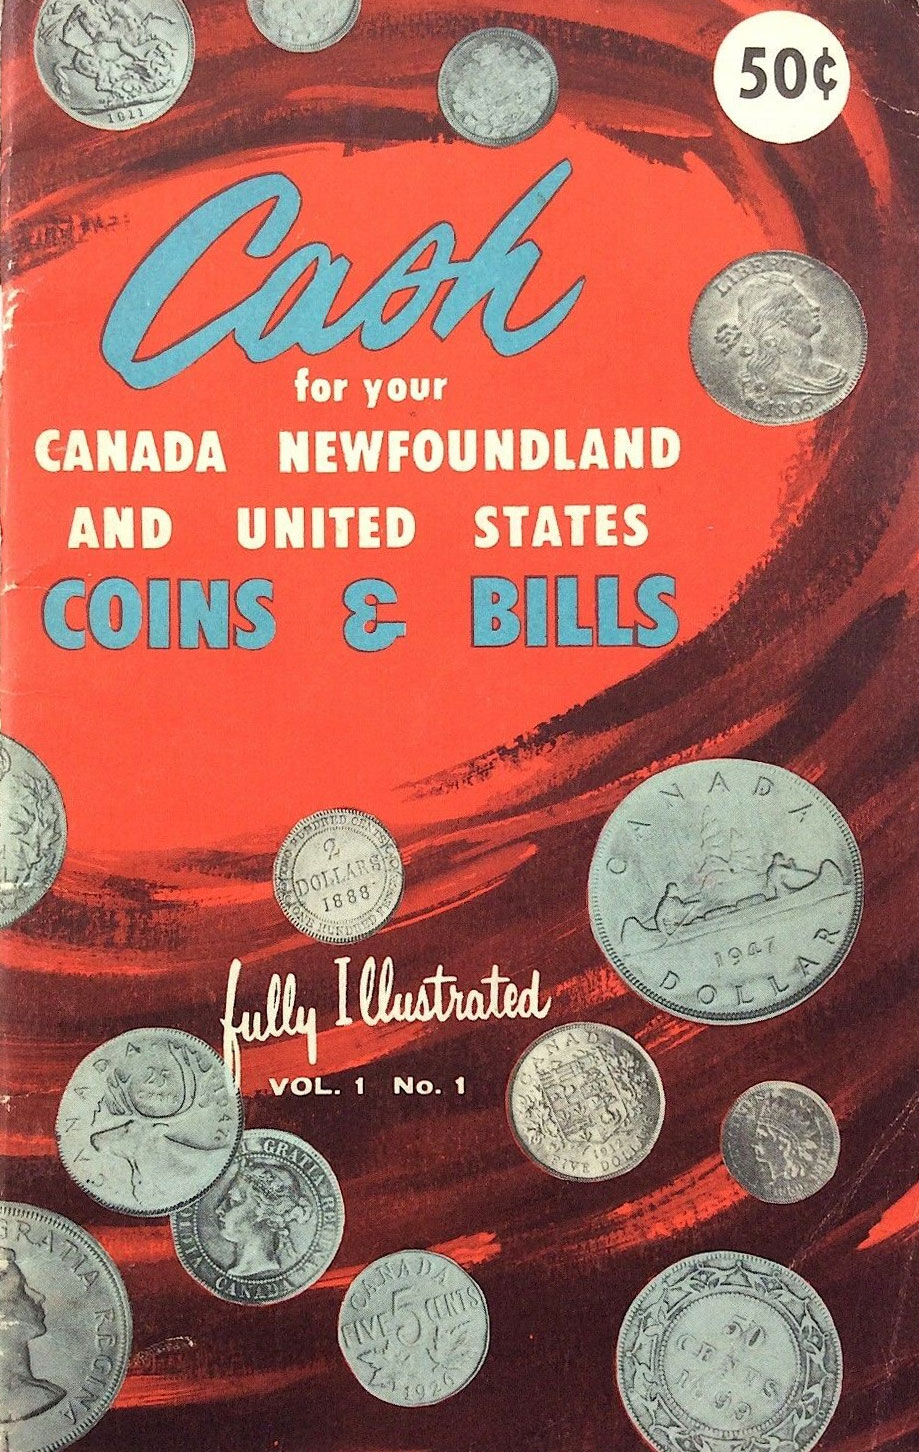 Cash for your Canada Newfoundland and United States Coins & Bills Vol. 1 No. 1